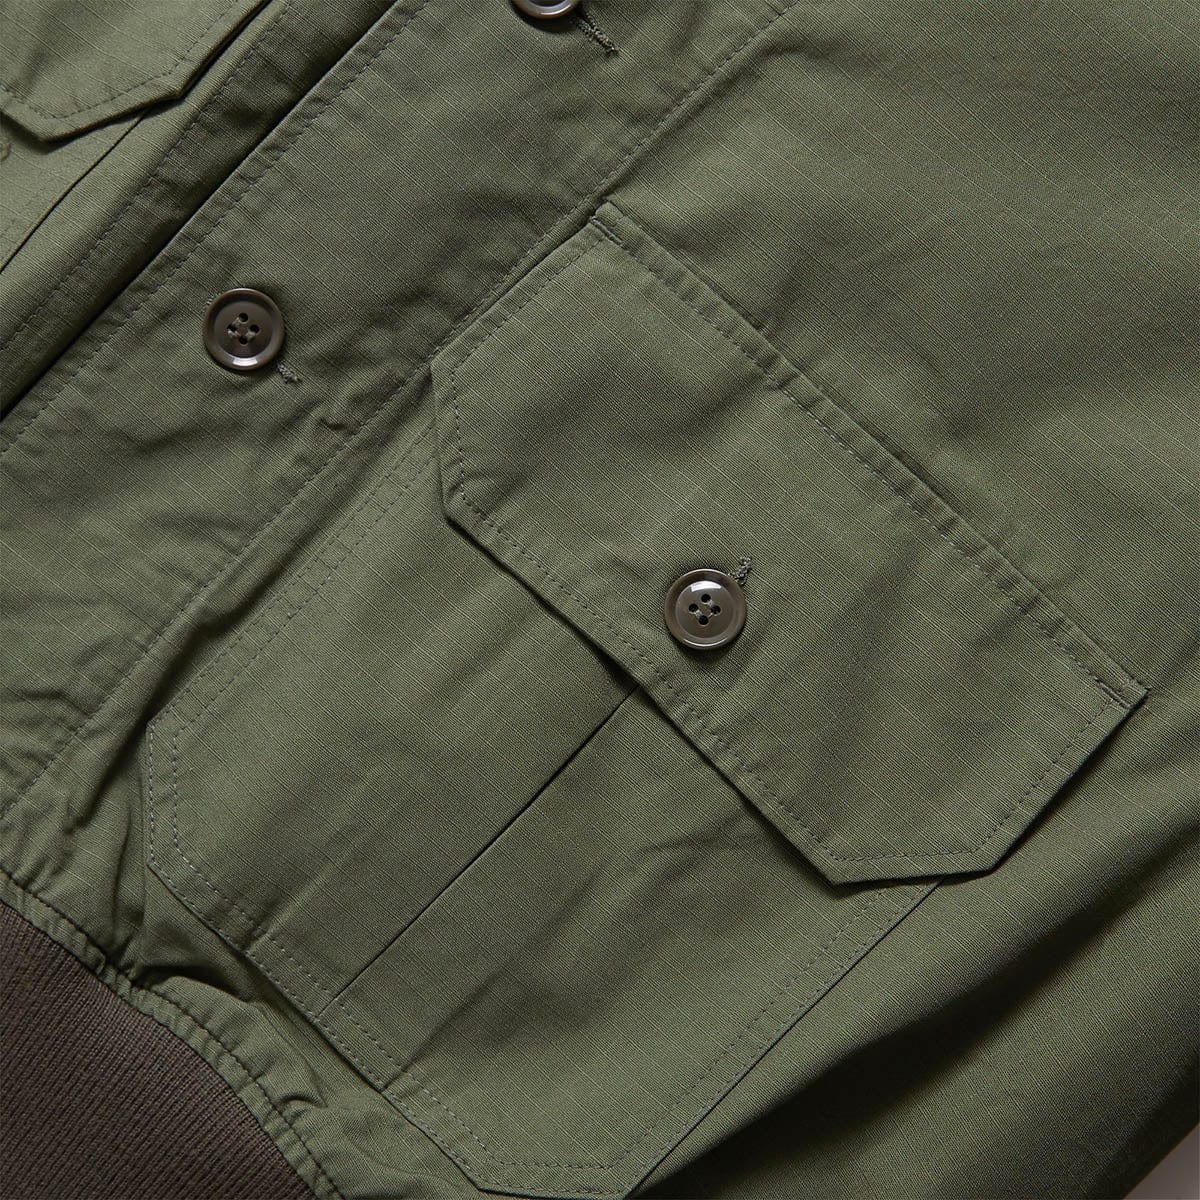 Engineered Garments Outerwear A-1 JACKET